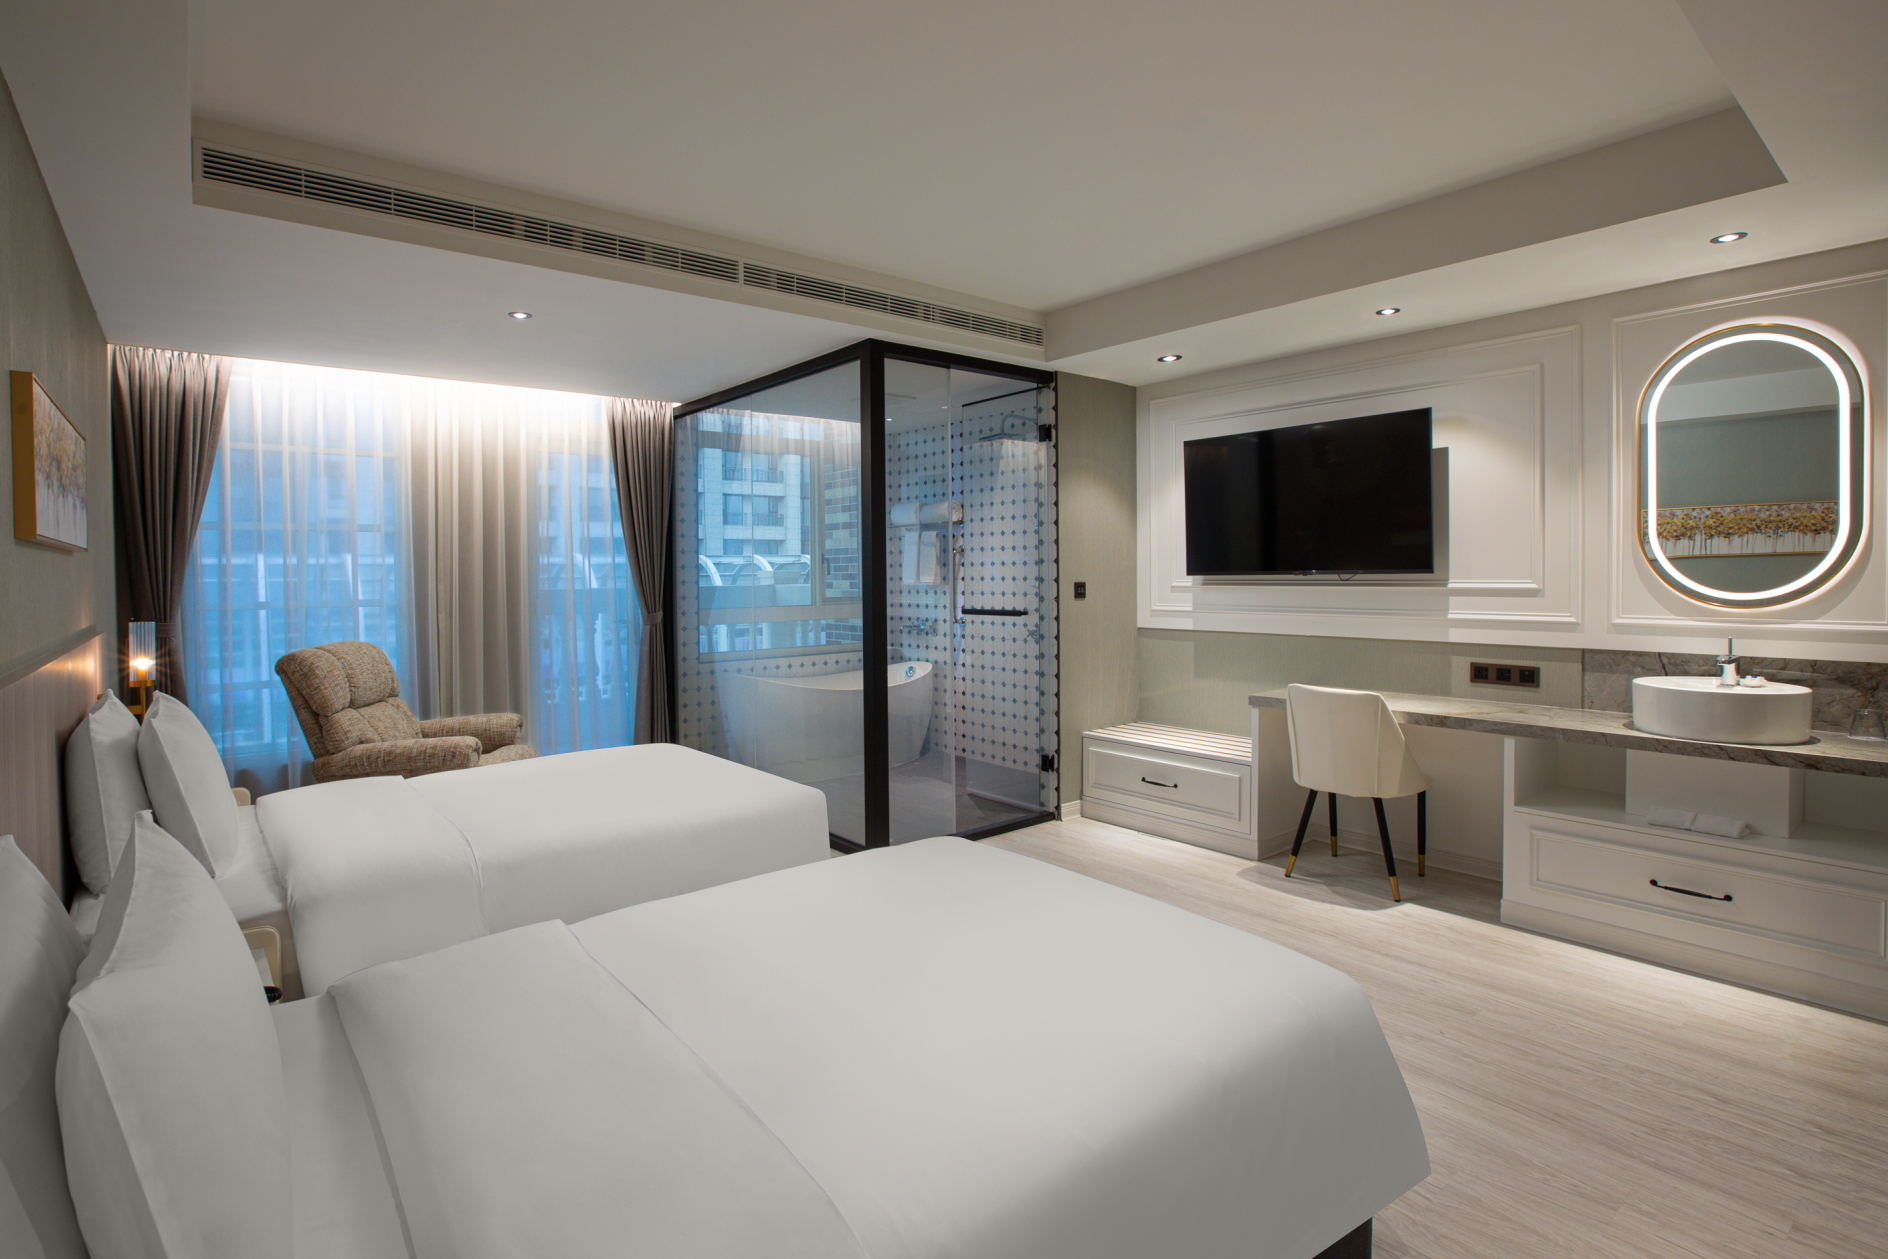 Room at TRYP by Wyndham New Taipei Linkou. Click to enlarge.